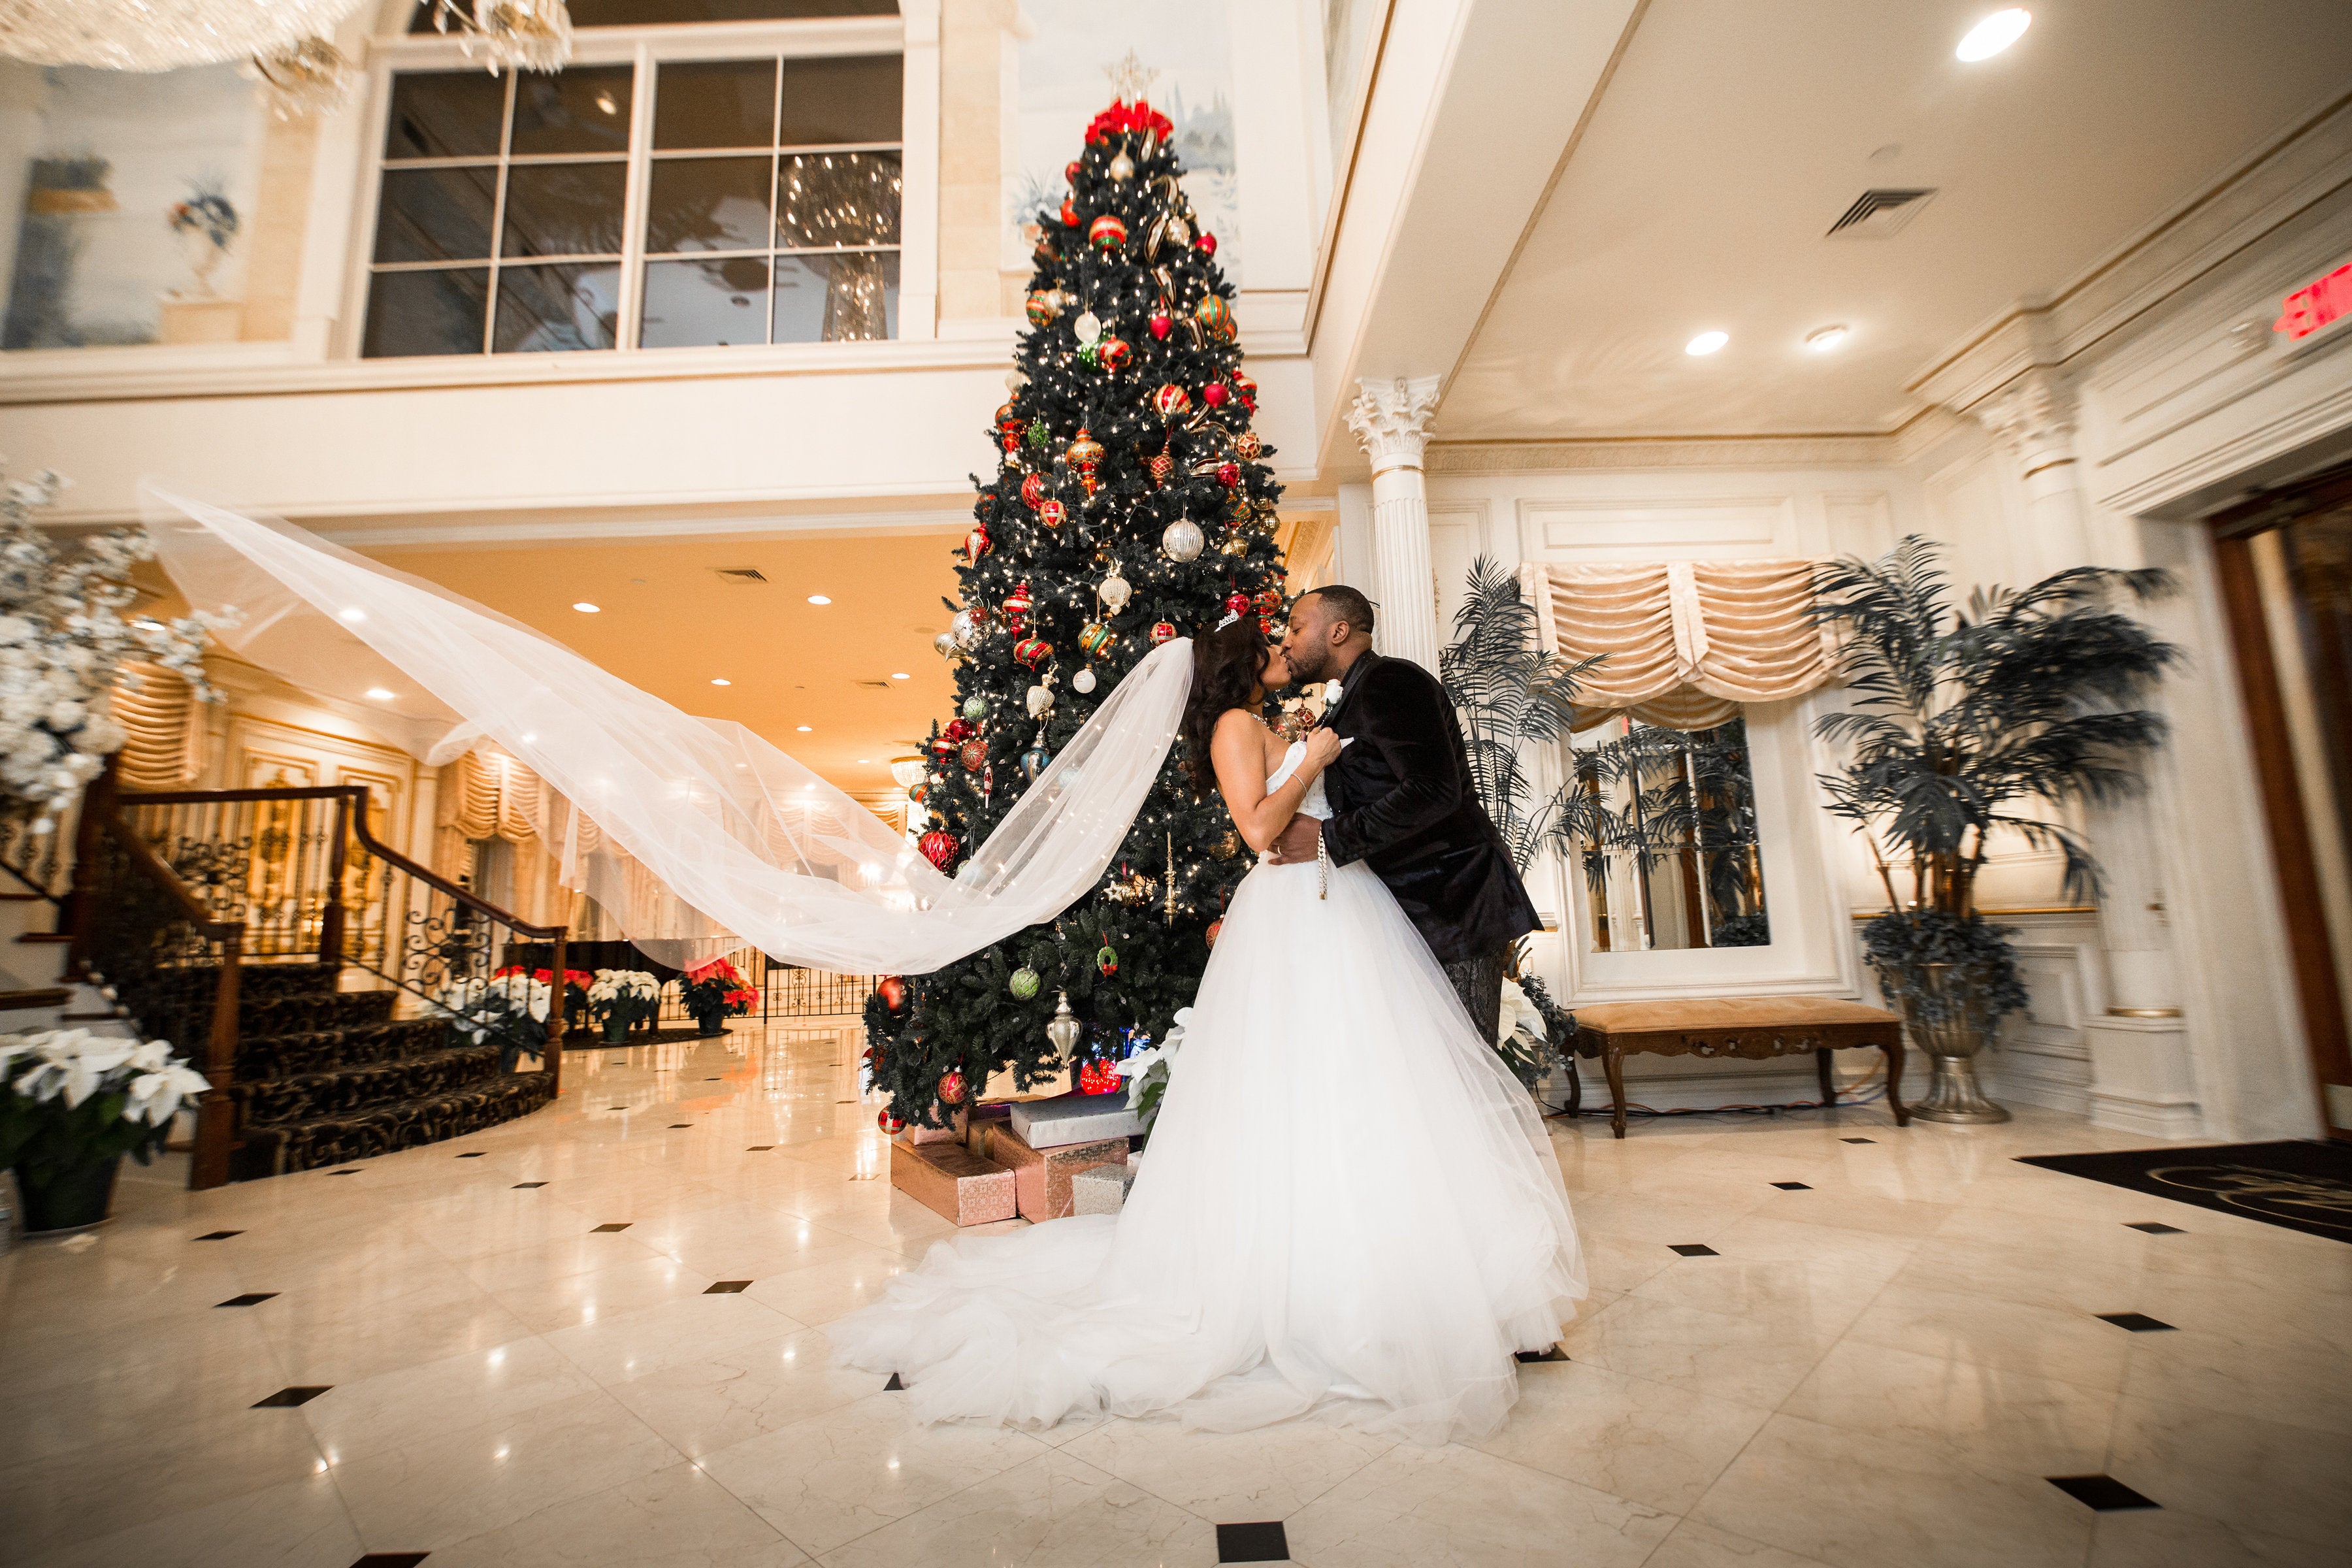 Bridal Bliss: Rahman And Gina's Romantic Winter Wedding Was One Of A Kind
